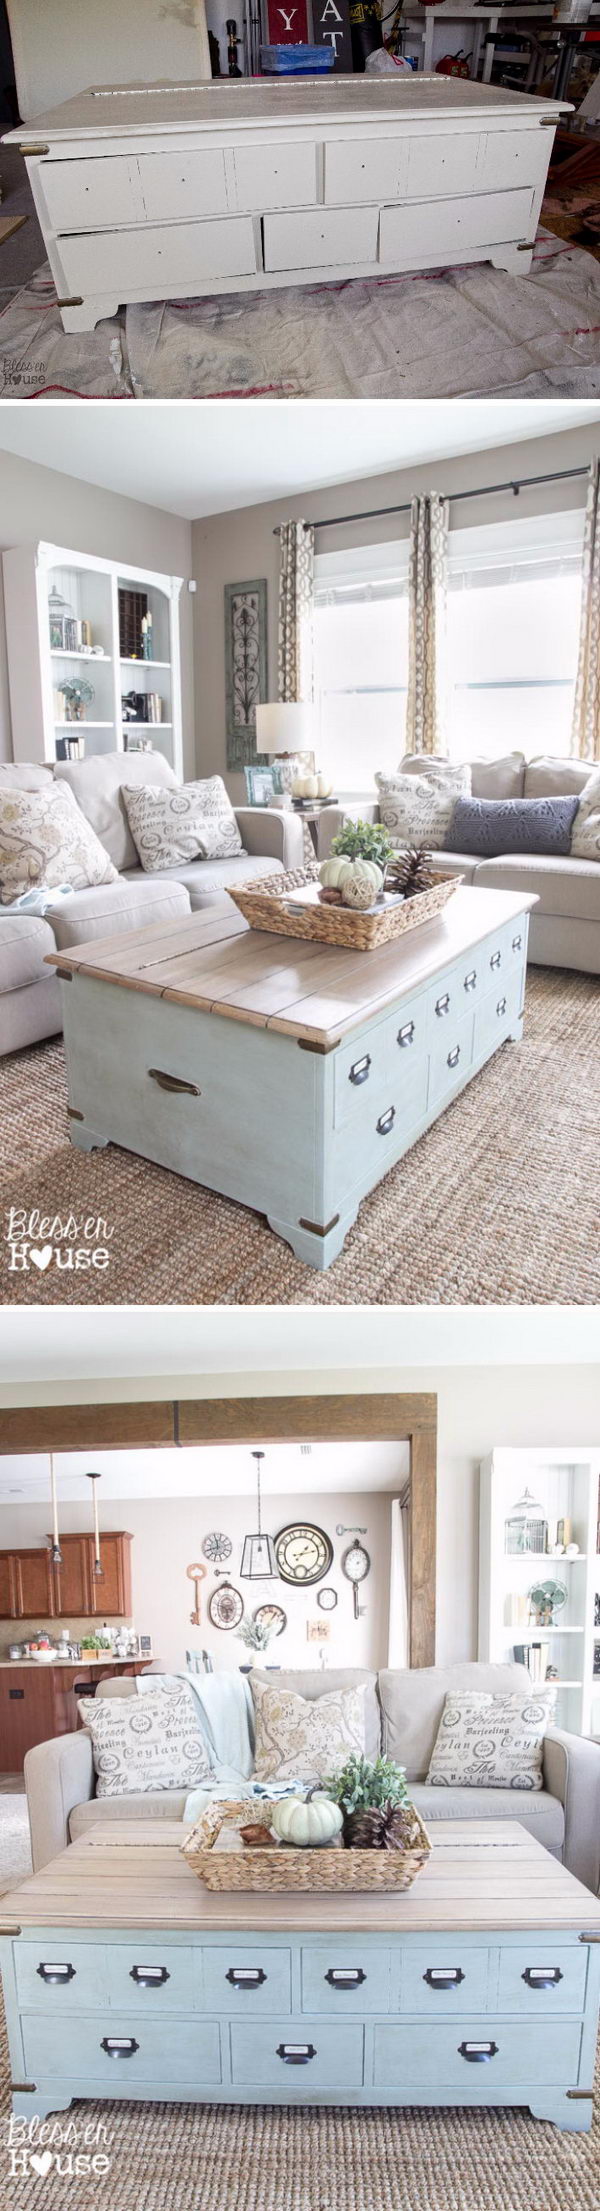 $50 Faux Planked Coffee Table Makeover from a Trunk Coffee Table. 